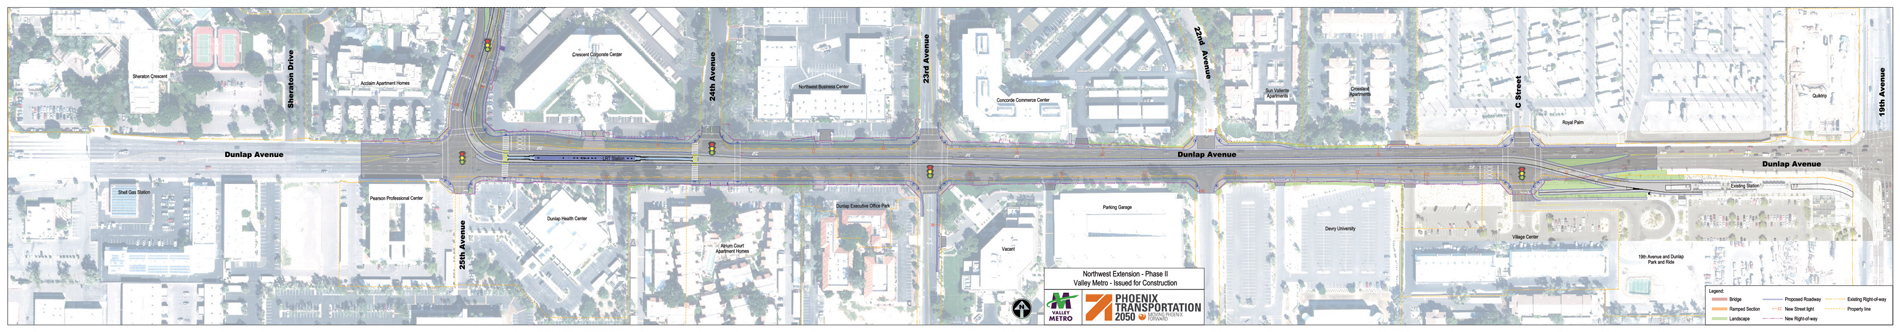 Final design for the Dunlap Ave. corridor is shown with light rail tracks progressing west from the current Dunlap and 19th avenues Park-and-Ride to 25th Ave., where the tracks will turn and head north. Along Dunlap Ave. at 19th Ave., the tracks are aligned on the south side of the street. Moving west, the tracks move to the middle of the street from C Street to near 25th Ave. A new light rail station is shown at Dunlap Ave., just before 25th Ave.